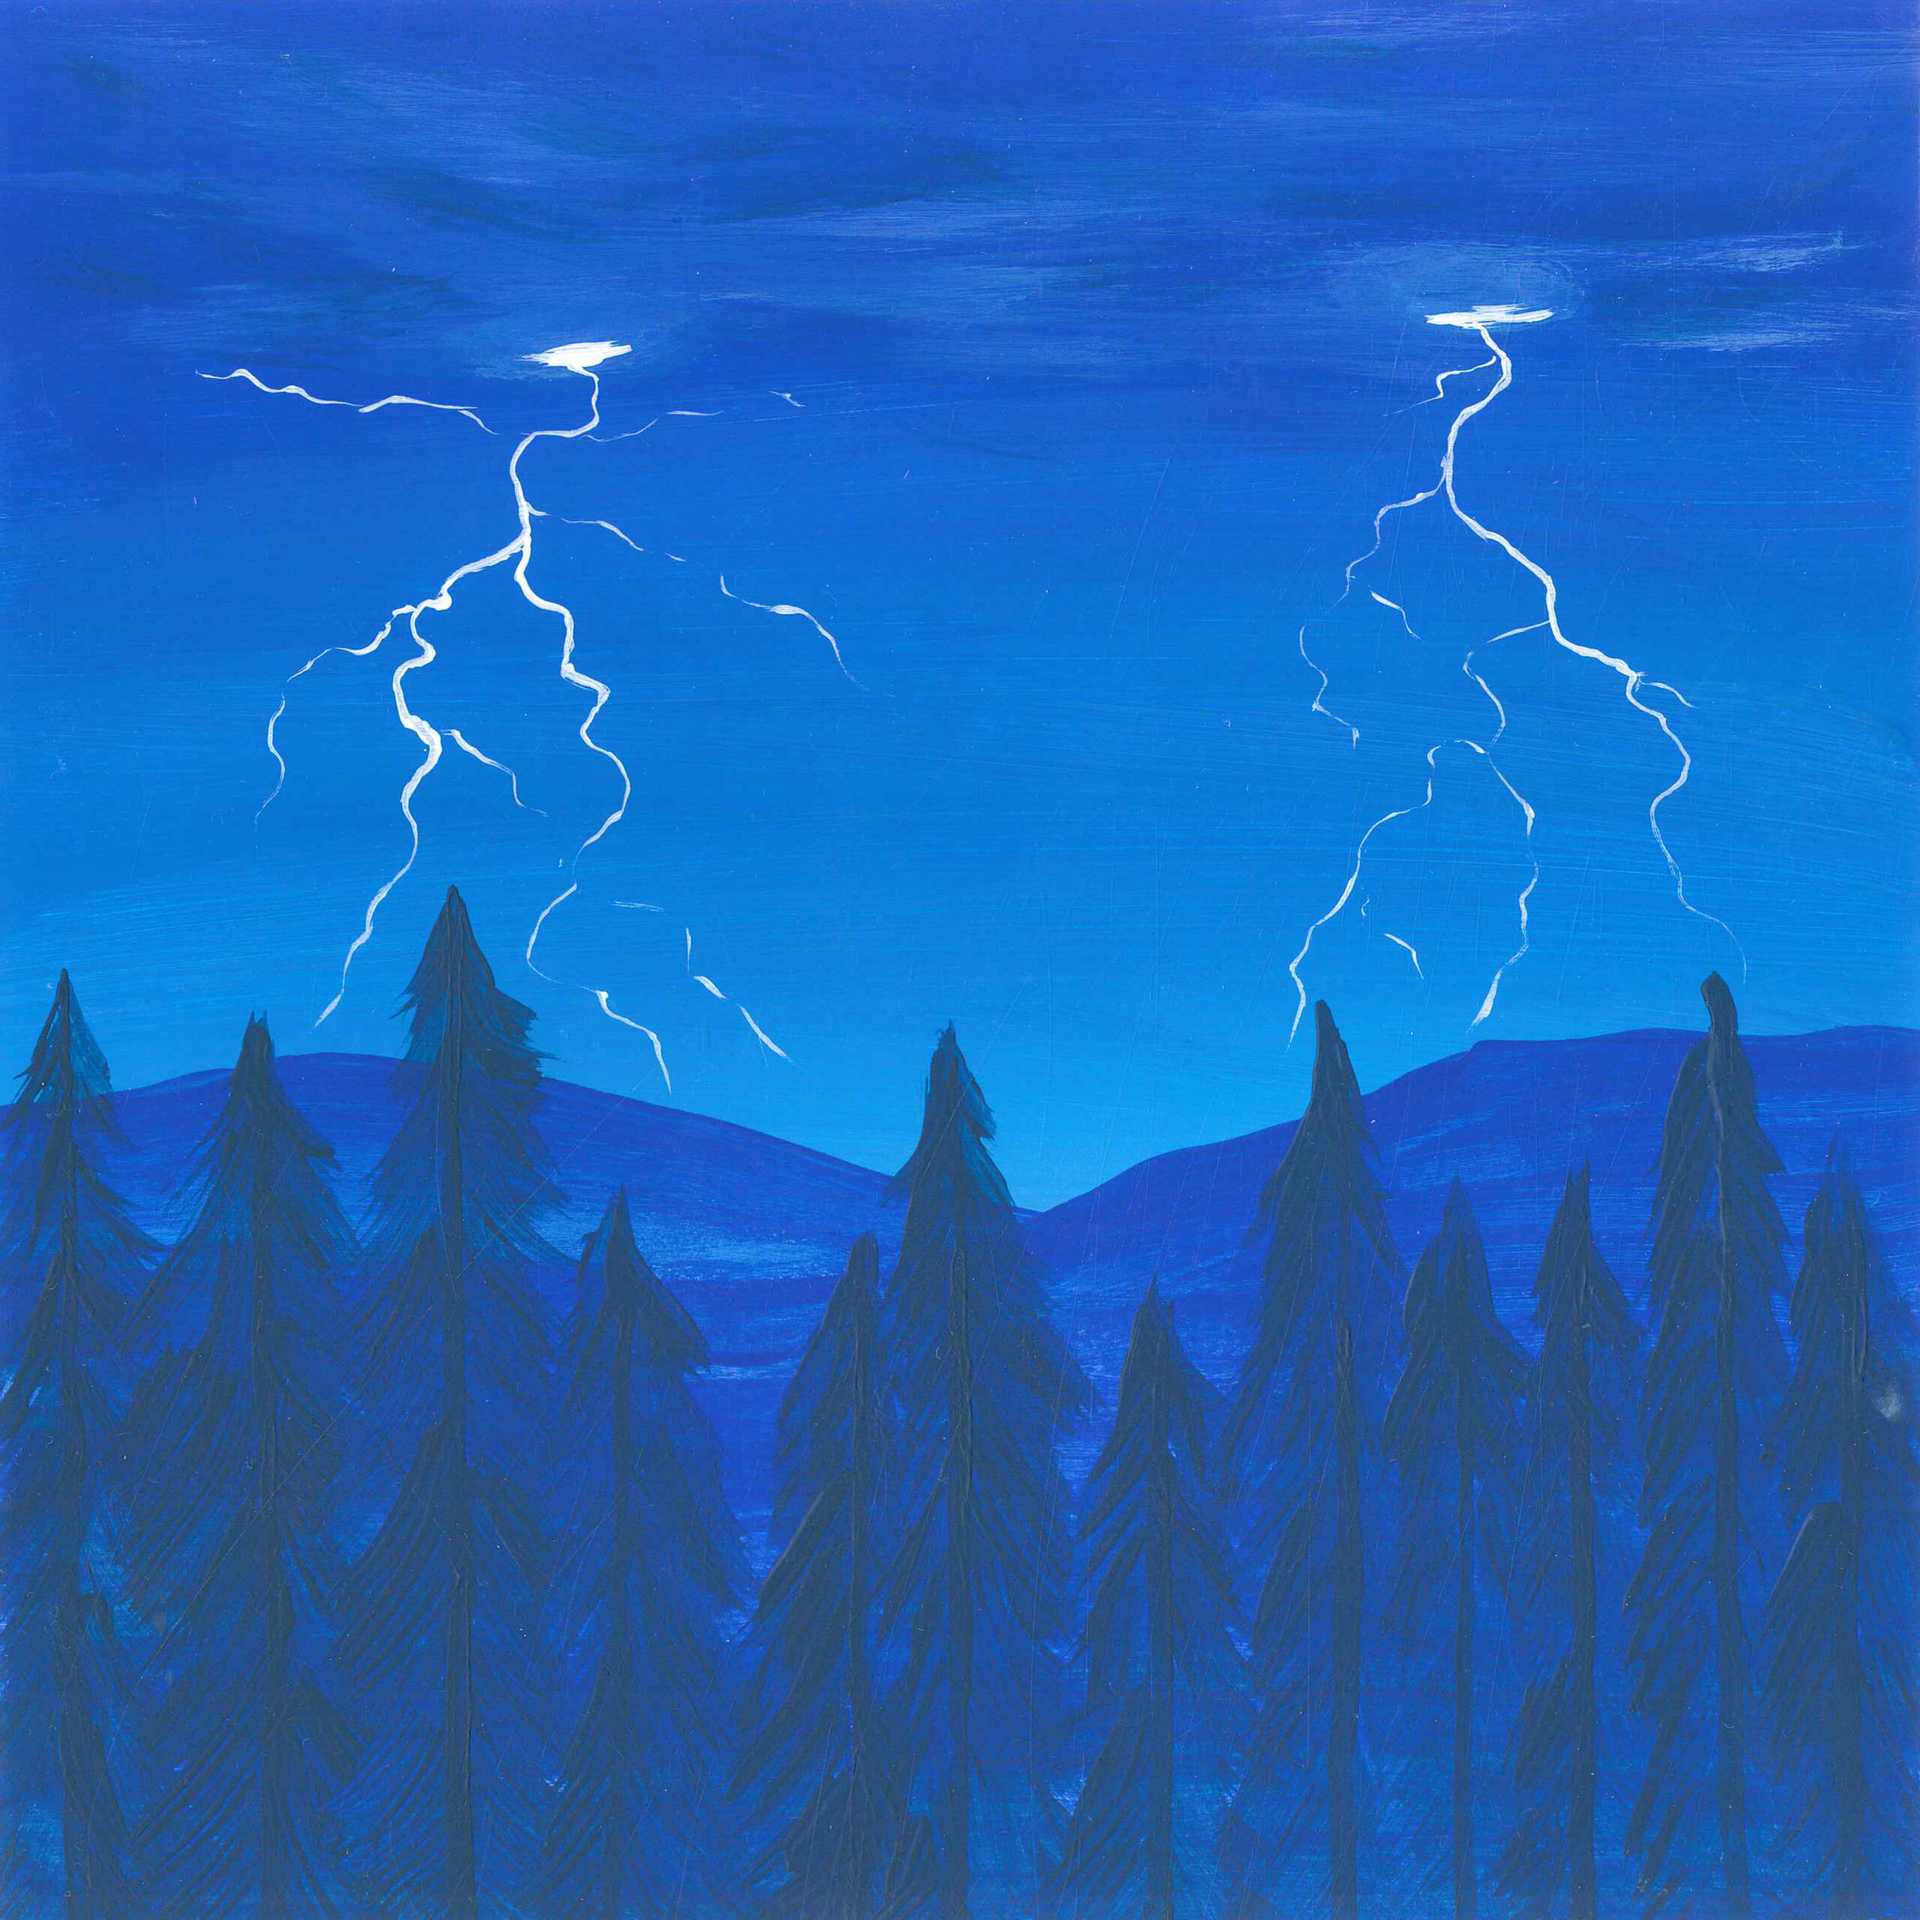 Spring Thunderstorm at White Deer Lake - nature landscape painting - earth.fm